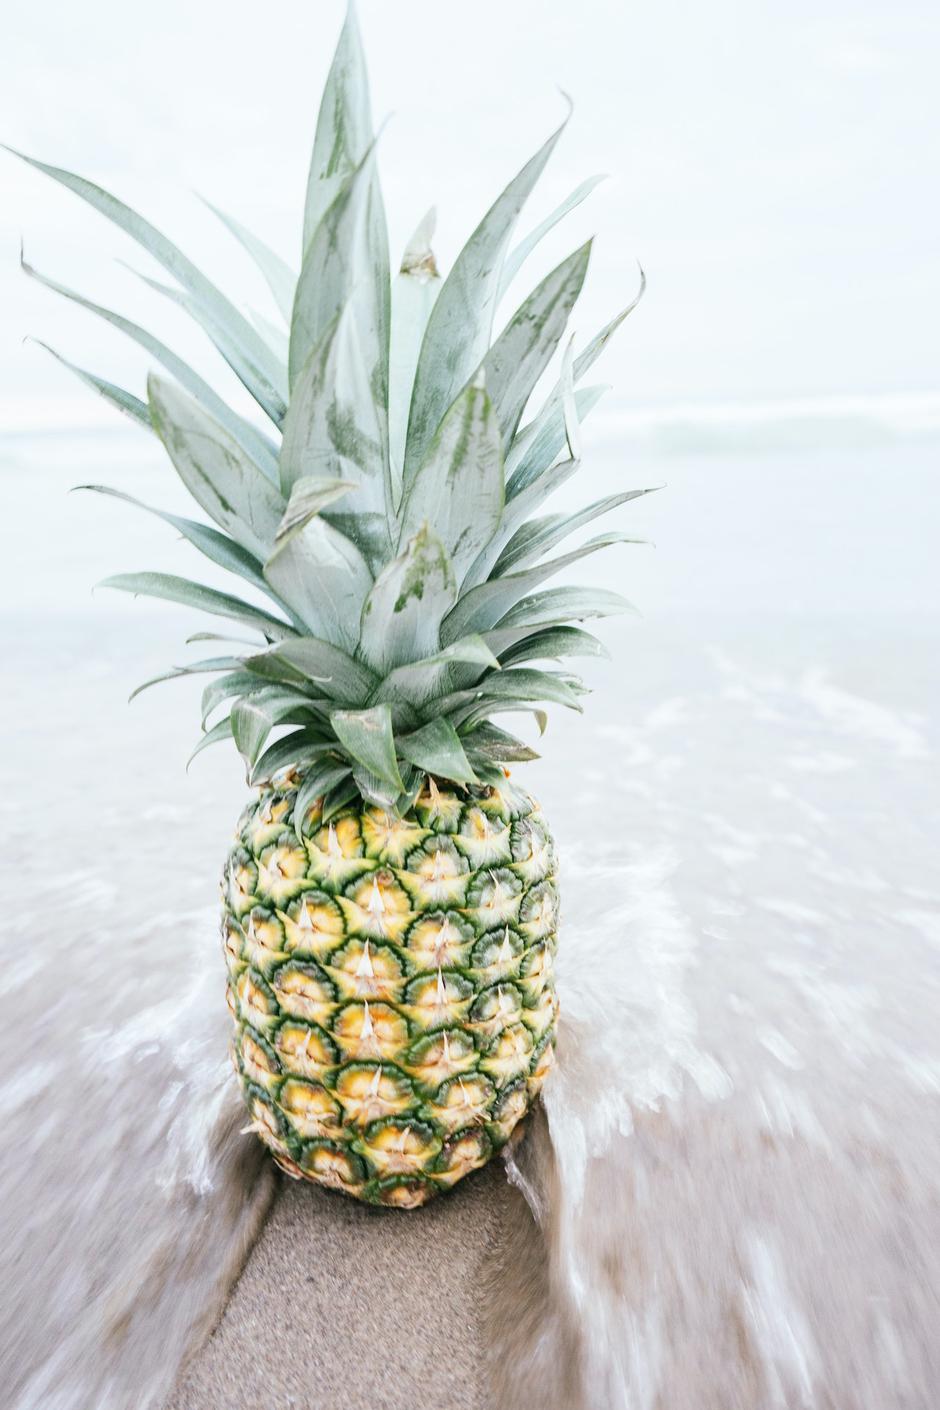  | Author: Pineapple Supply Co/Pexels